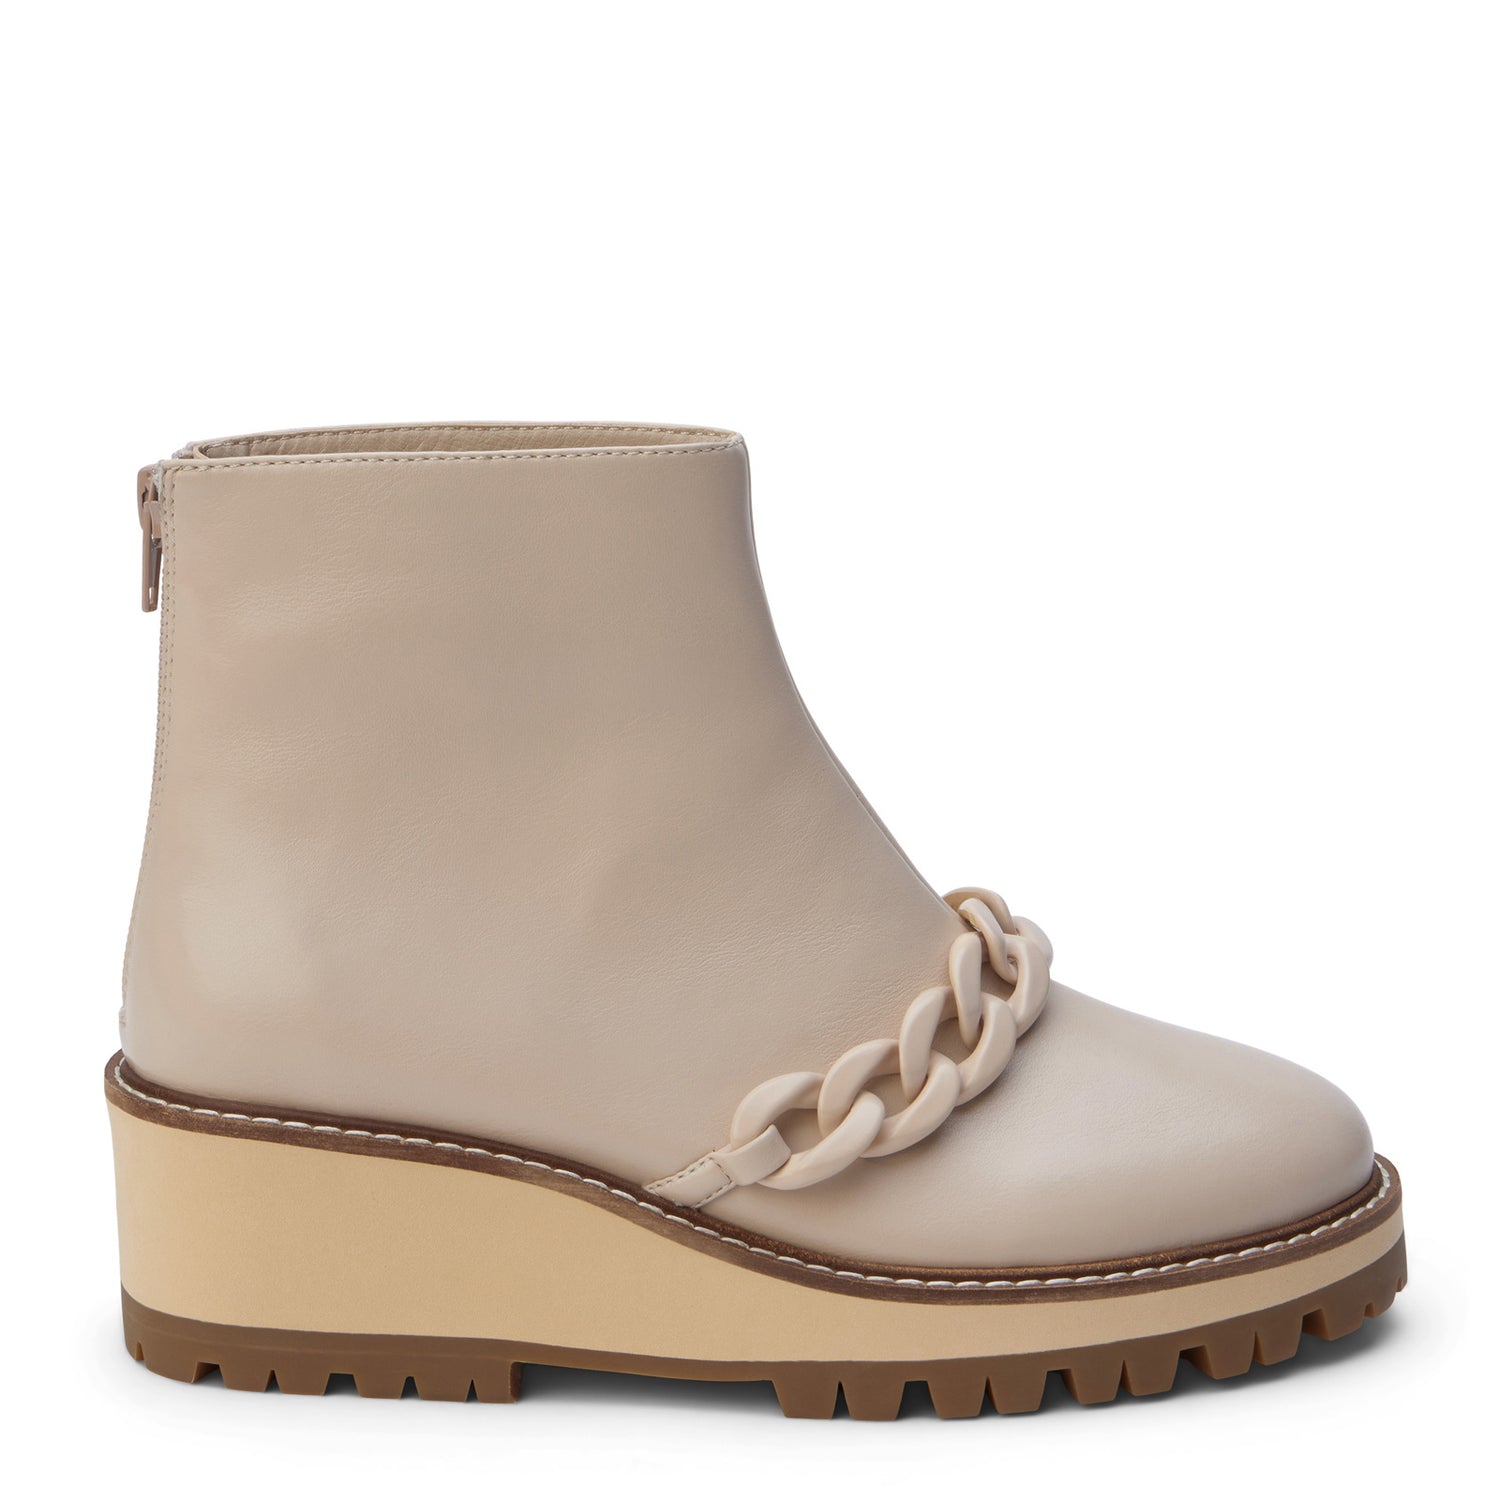 Peltz Shoes  Women's Coconuts By Matisse Sycamore Boot NATURAL SYCAMORE NATURAL